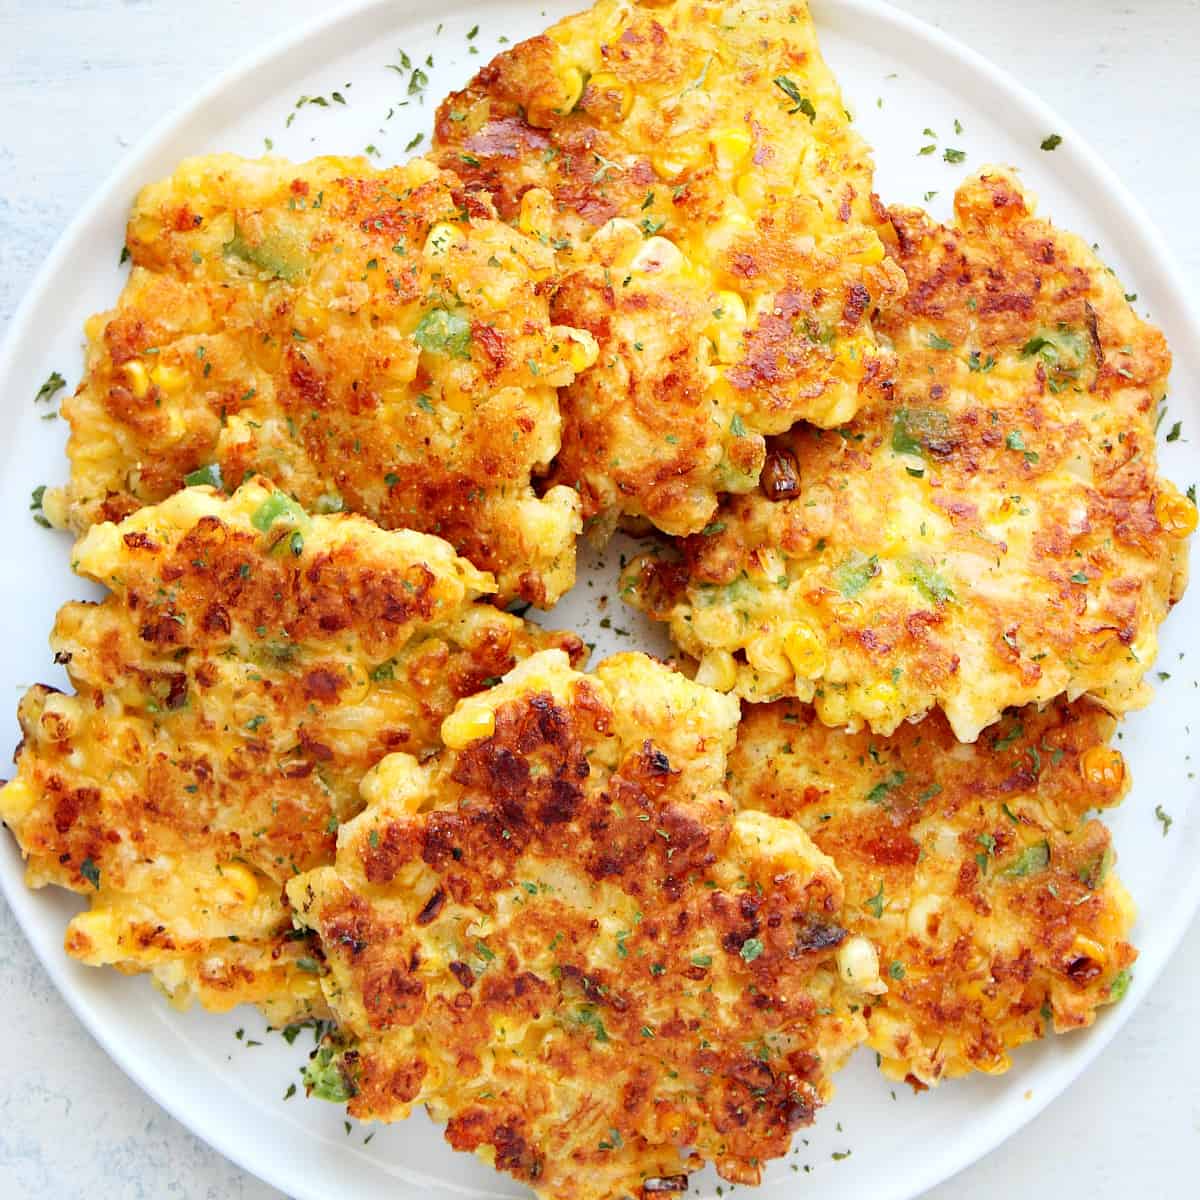 Fried corn cakes on plate.